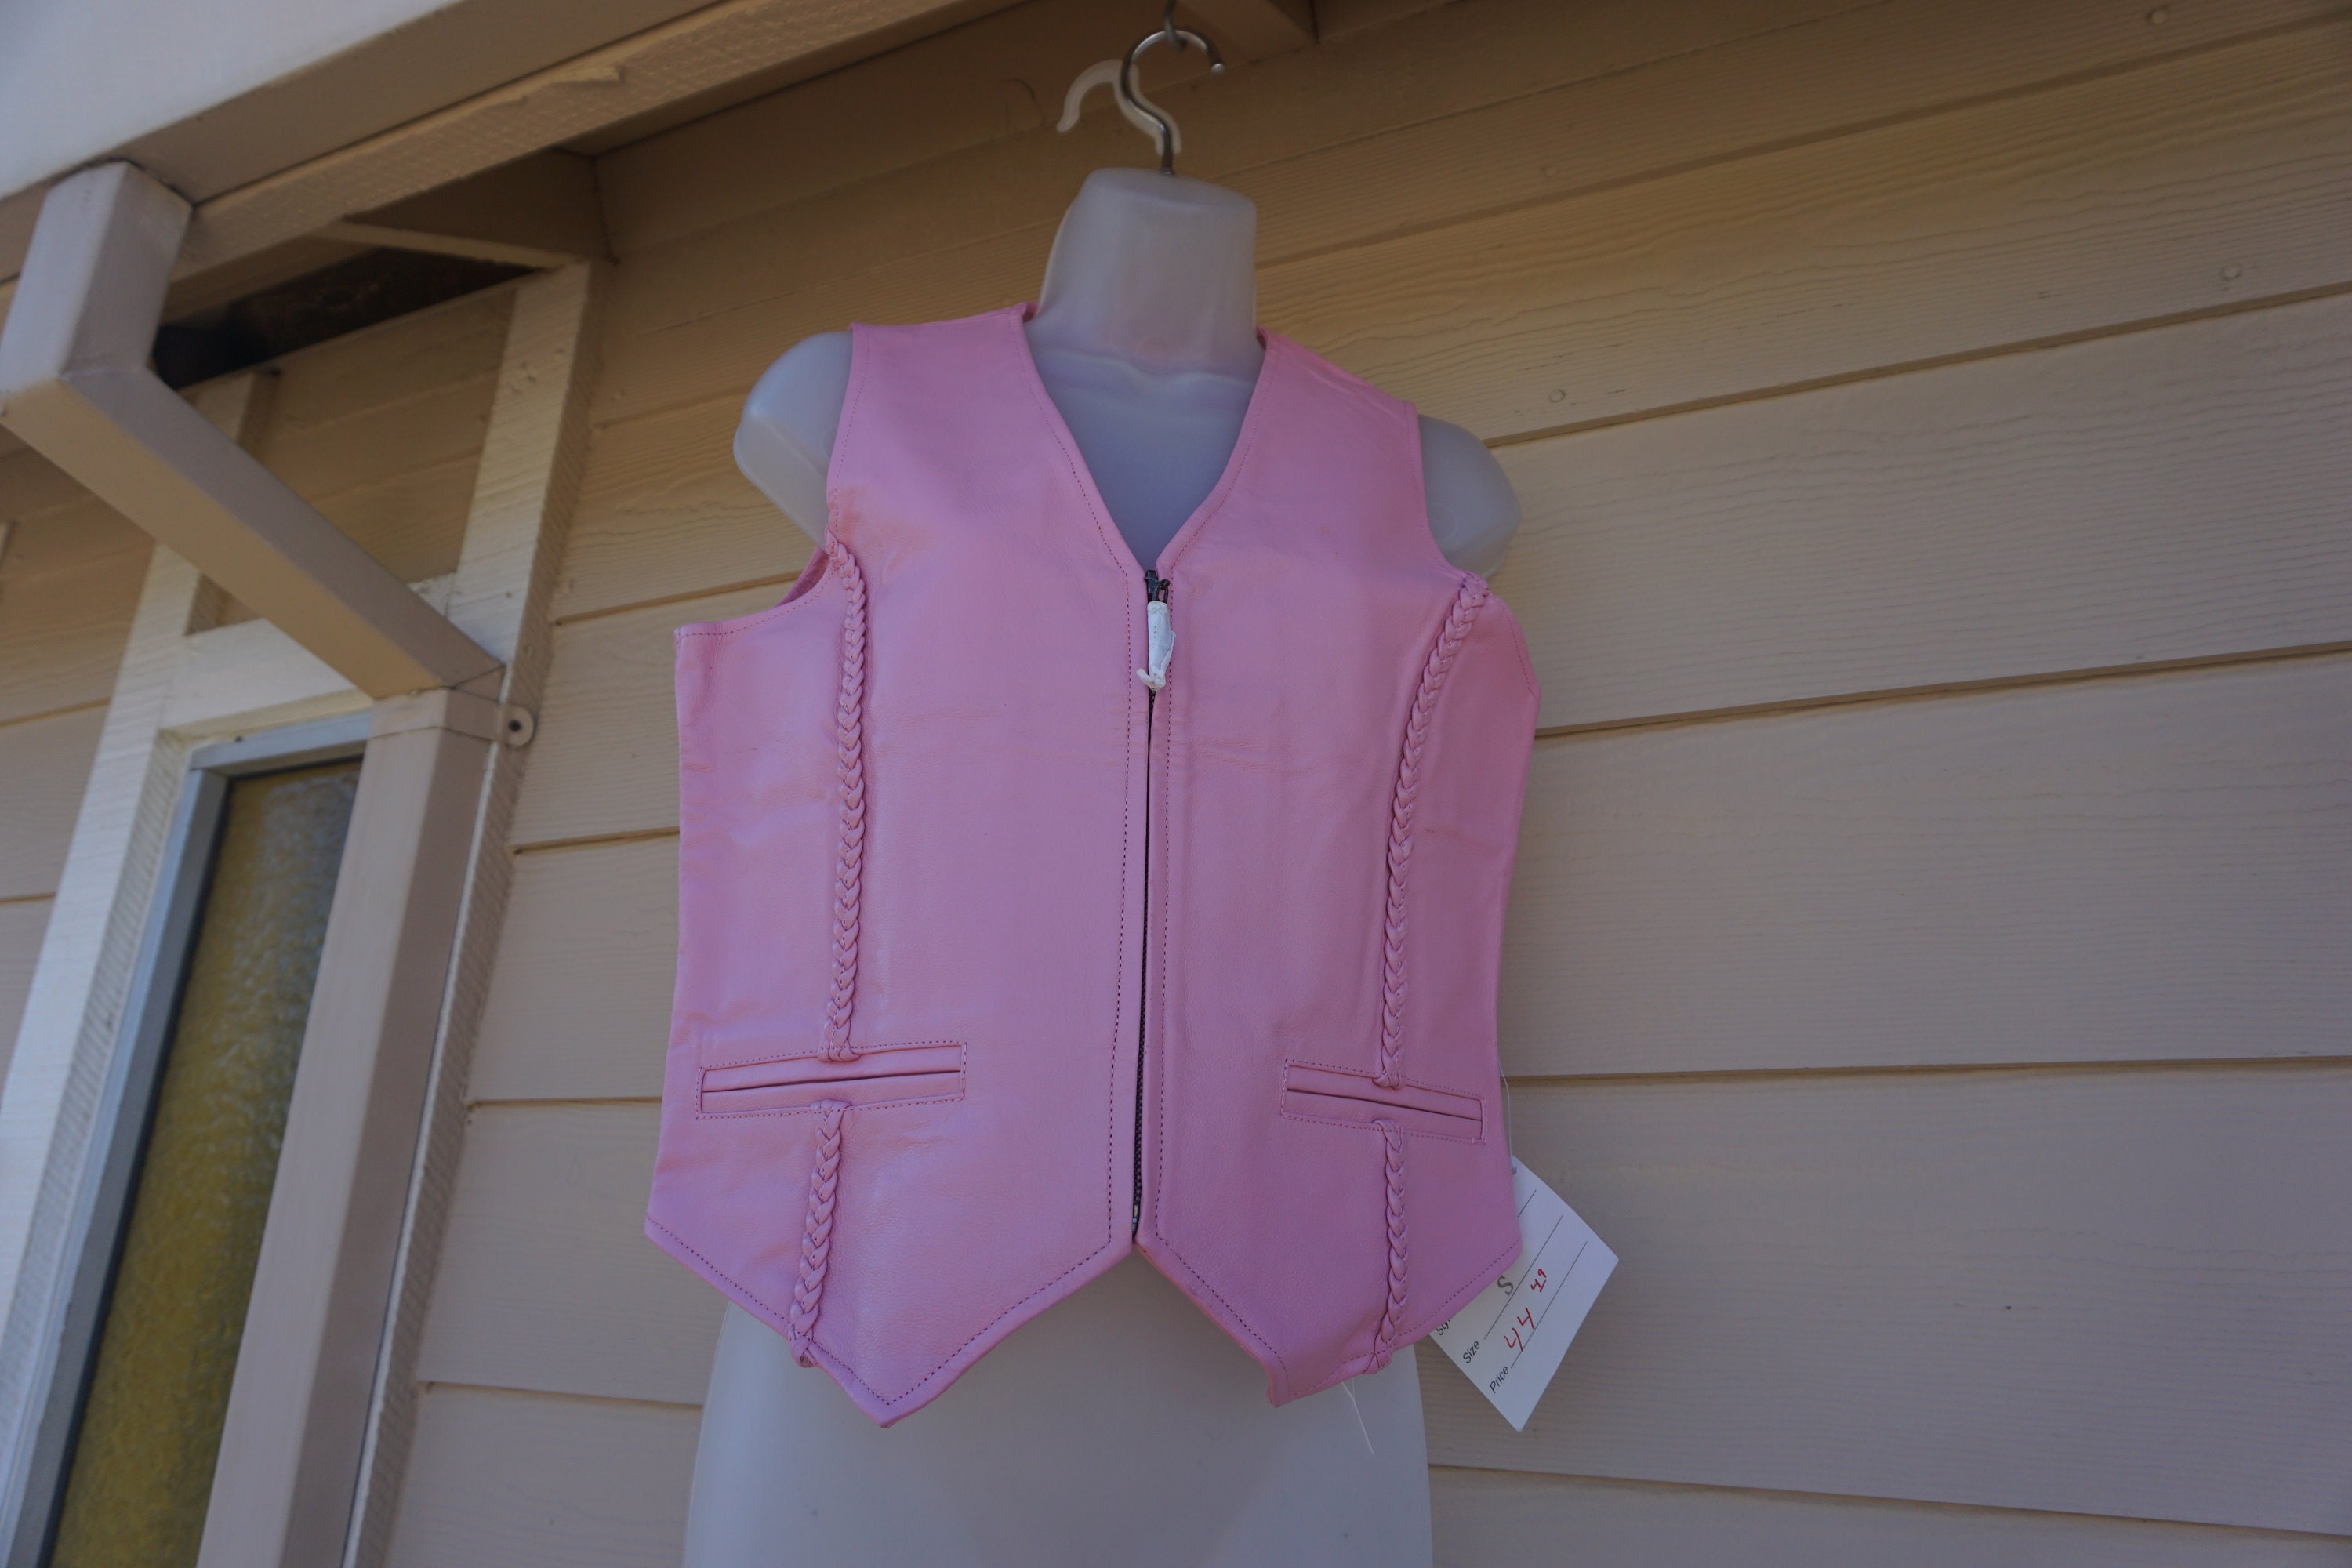 Womens Hot Pink Bulletproof Style Leather Vest